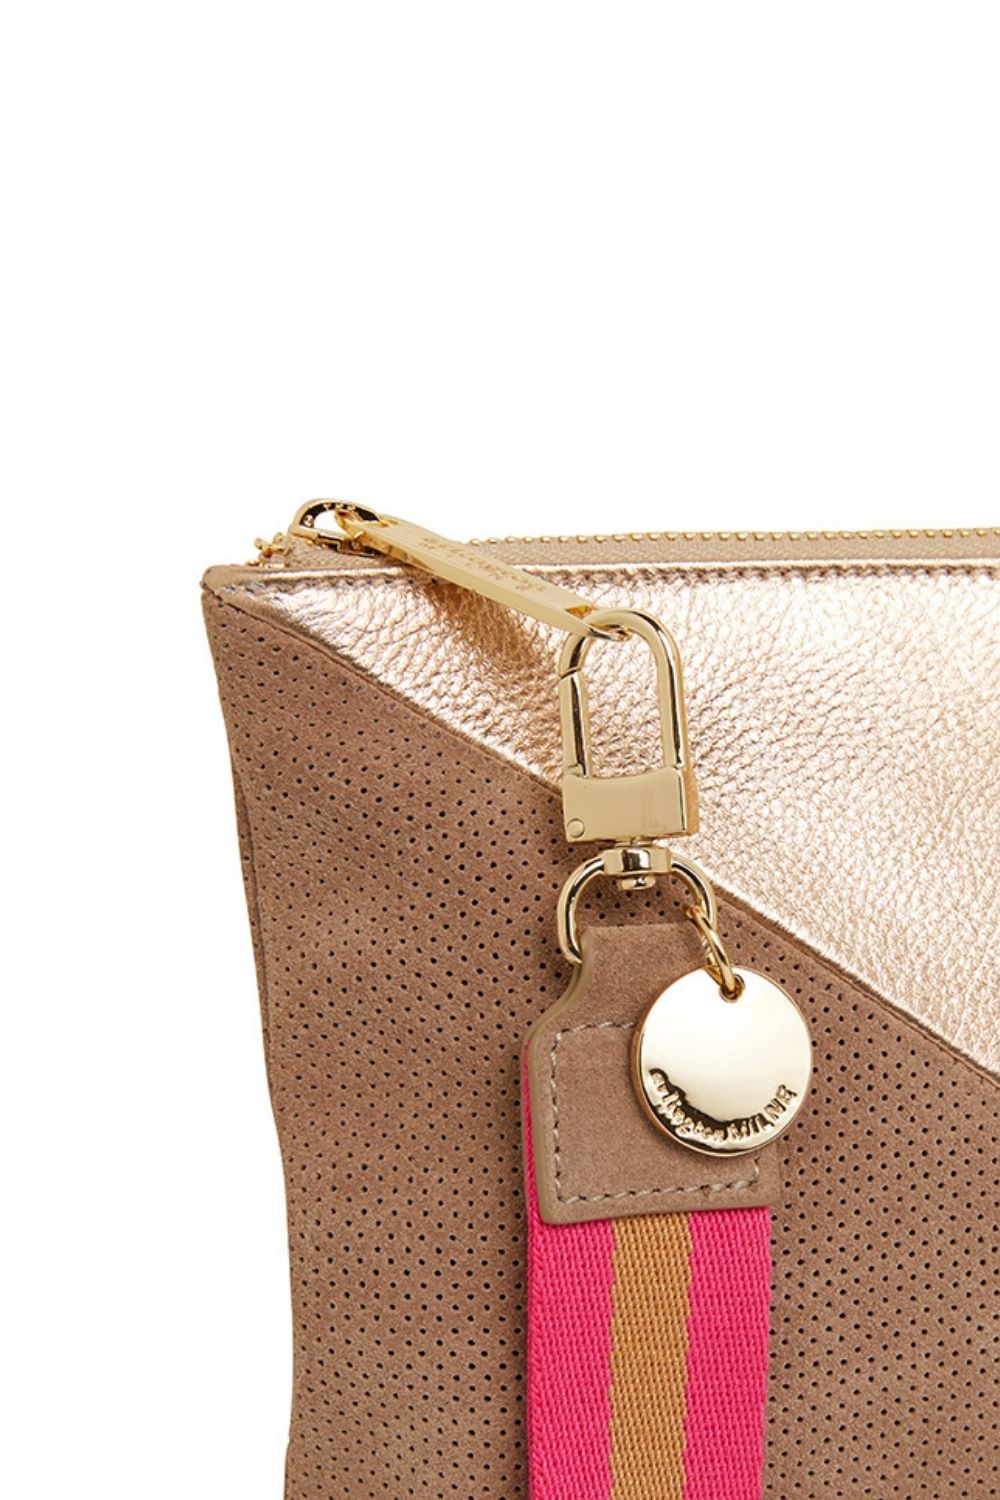 PAIGE CLUTCH SPLICE - FAWN AND ROSE GOLD